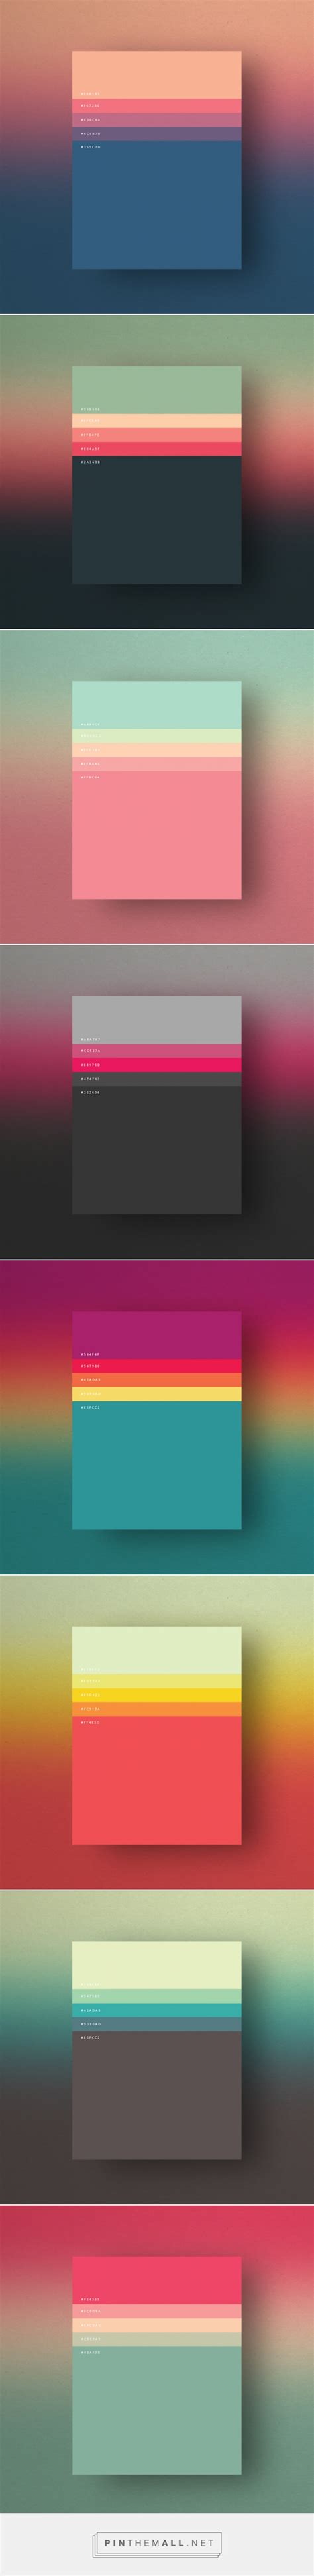 Beautiful Minimalist Color Palettes For Your Next Design Project Flat